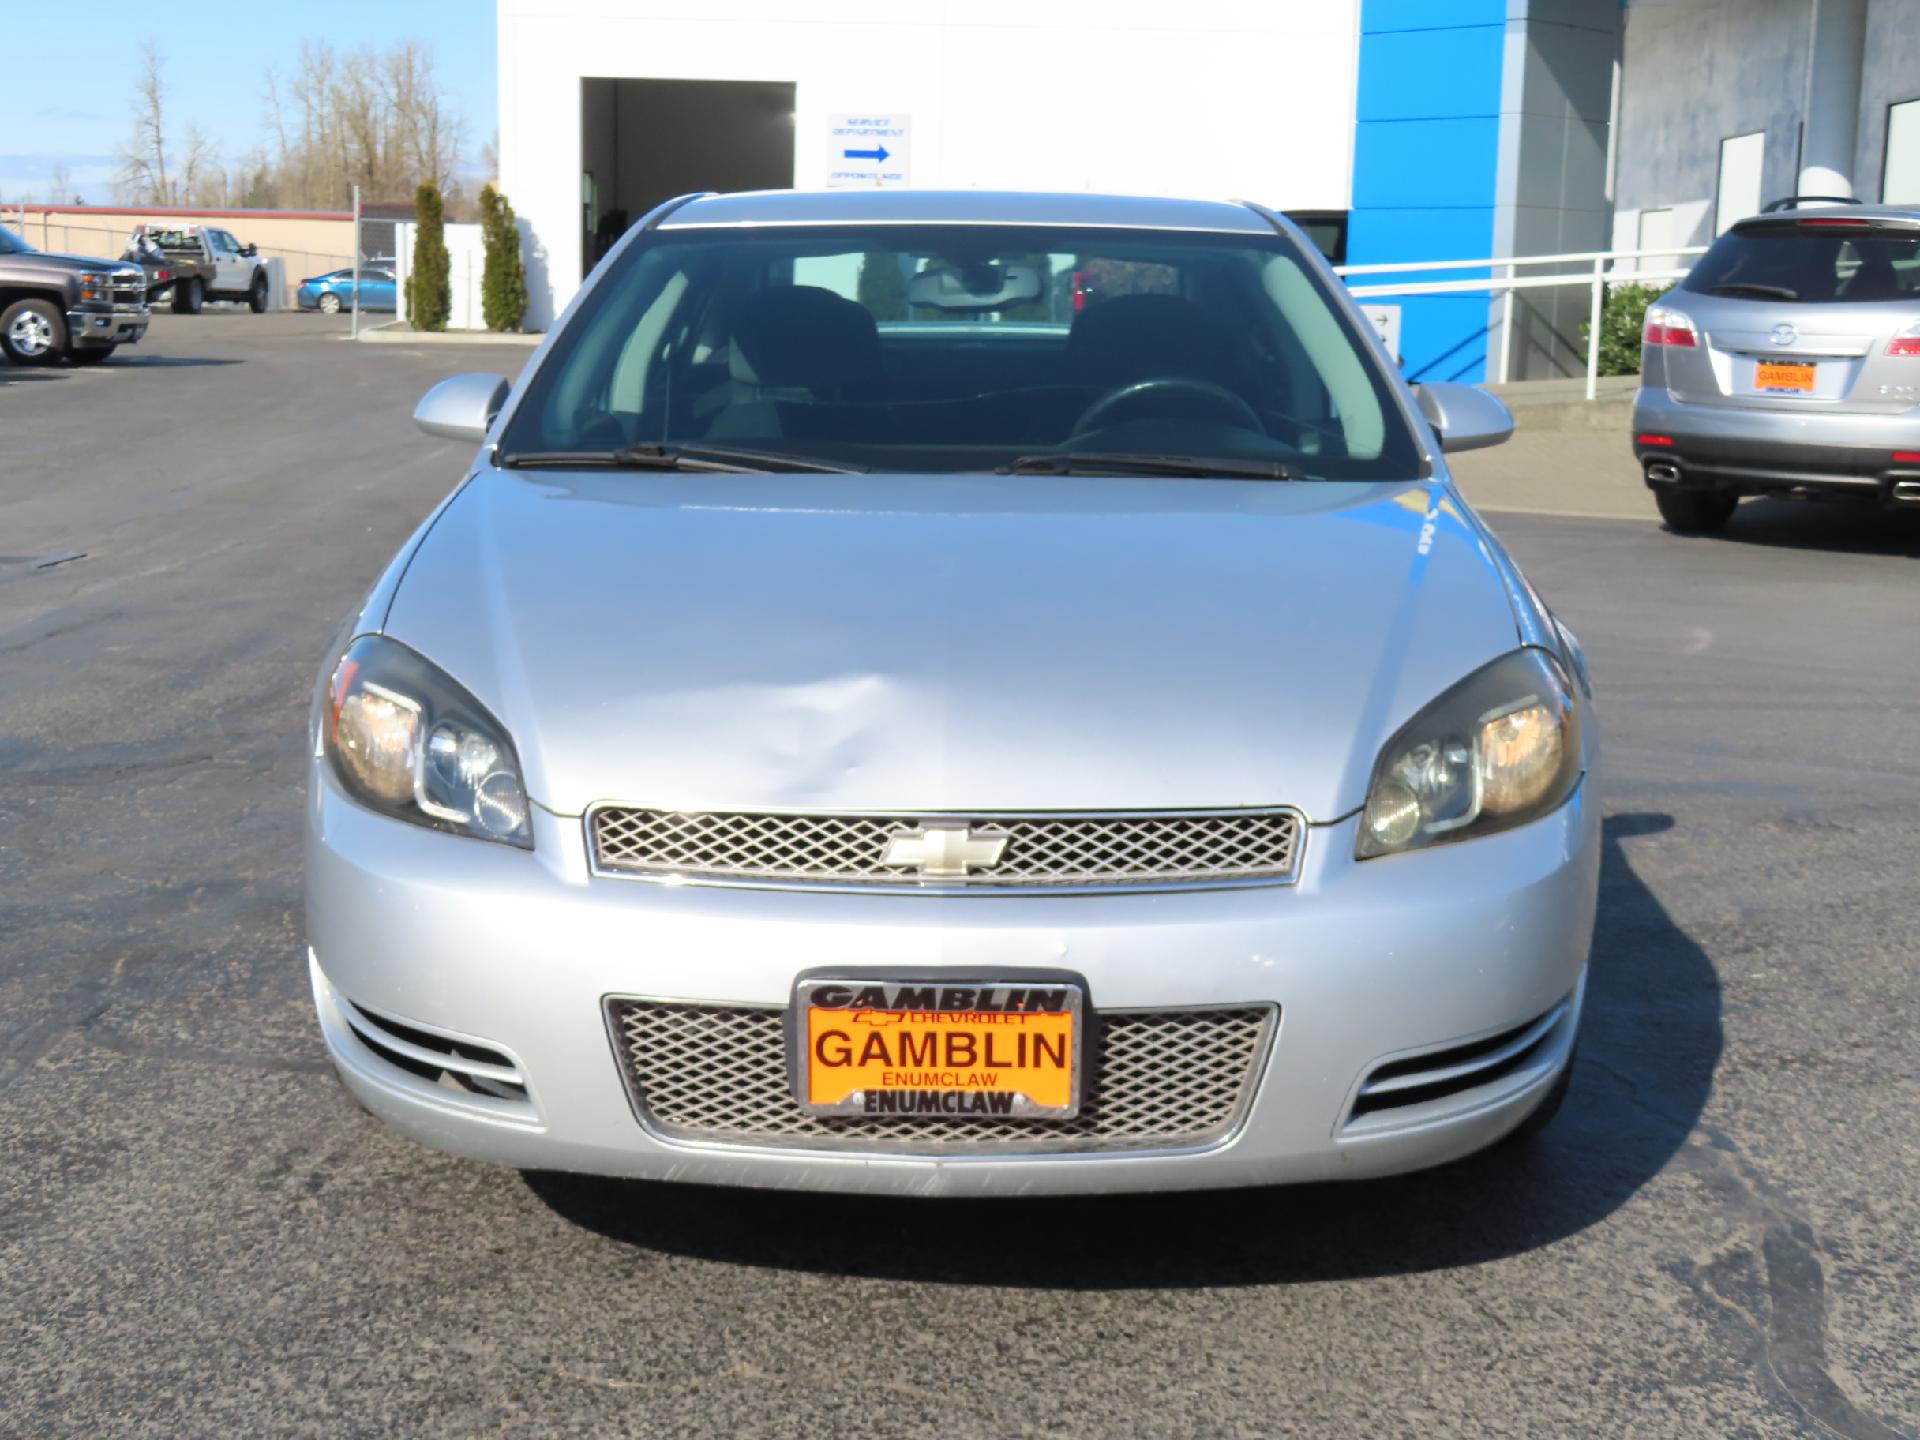 Used 2013 Chevrolet Impala LS with VIN 2G1WA5E3XD1175625 for sale in Enumclaw, WA